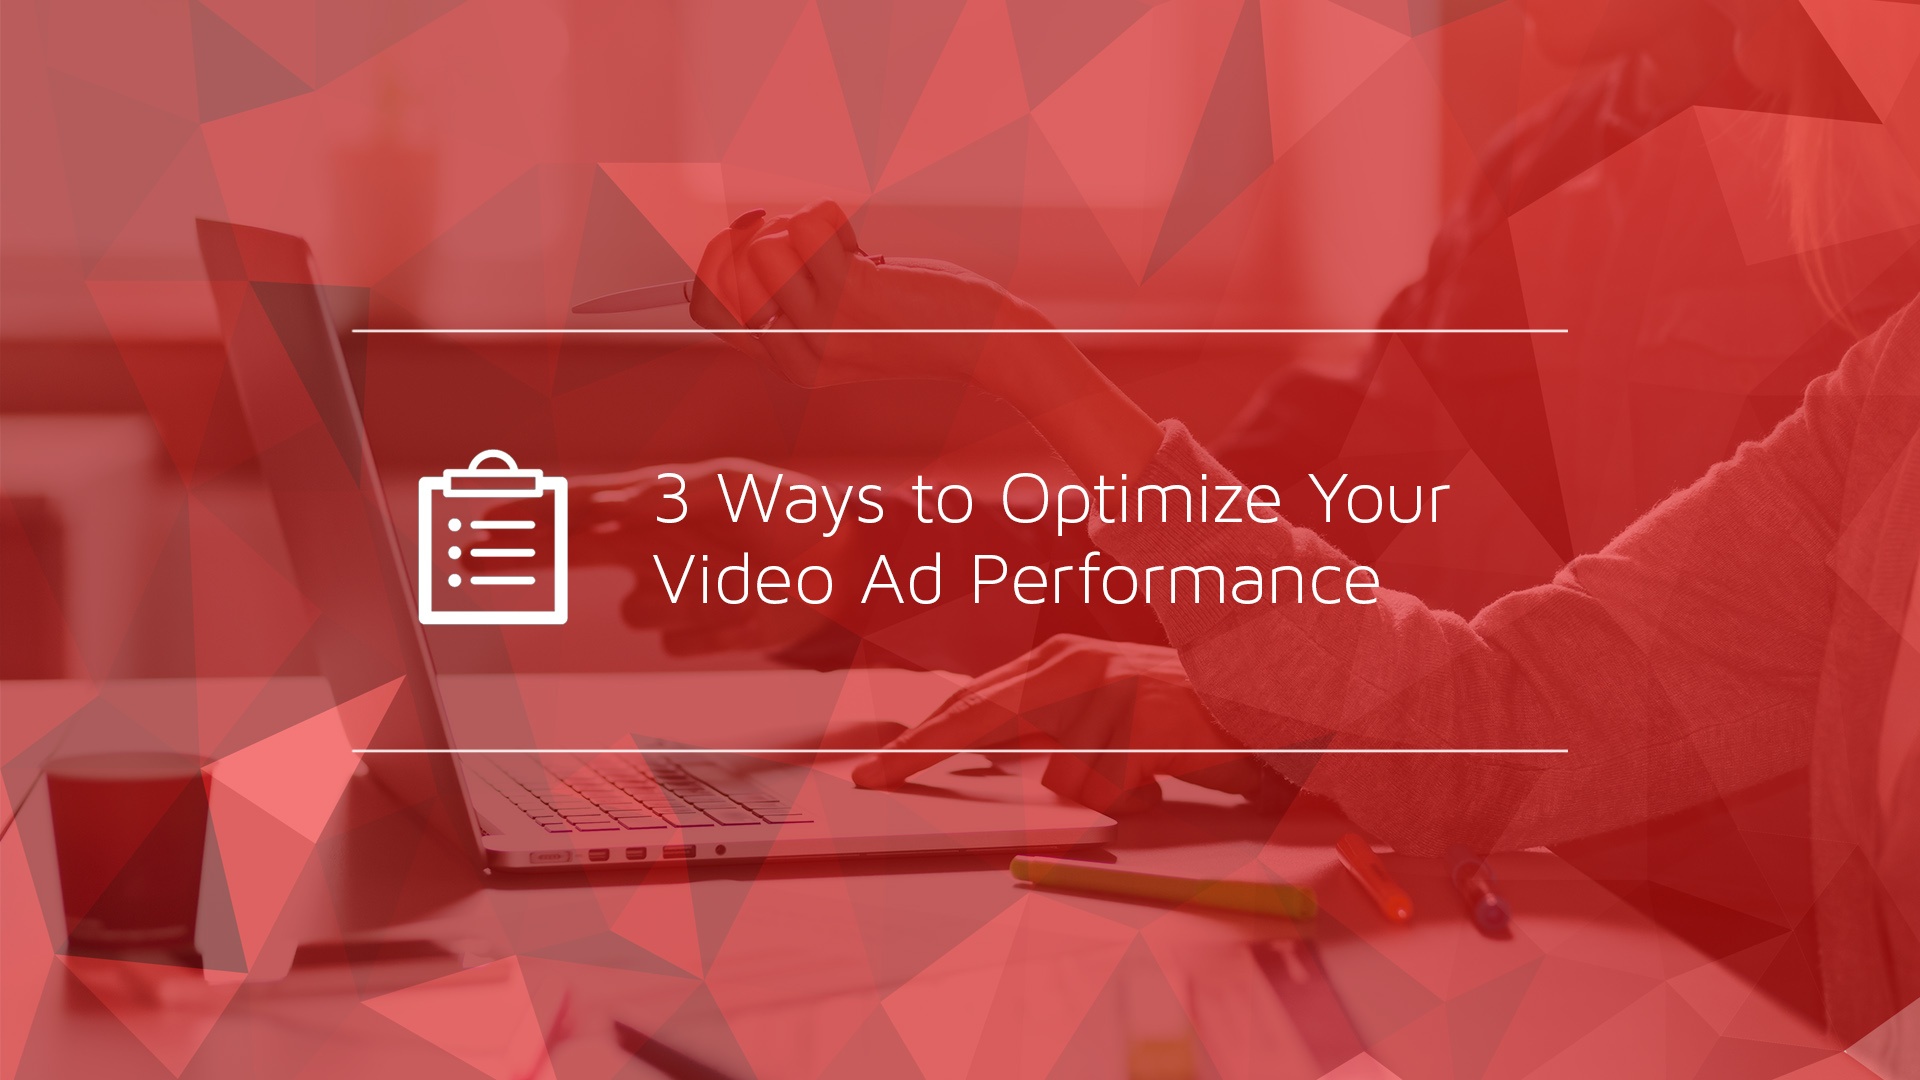 3 Ways to Optimize Your Video Ad Performance.jpg